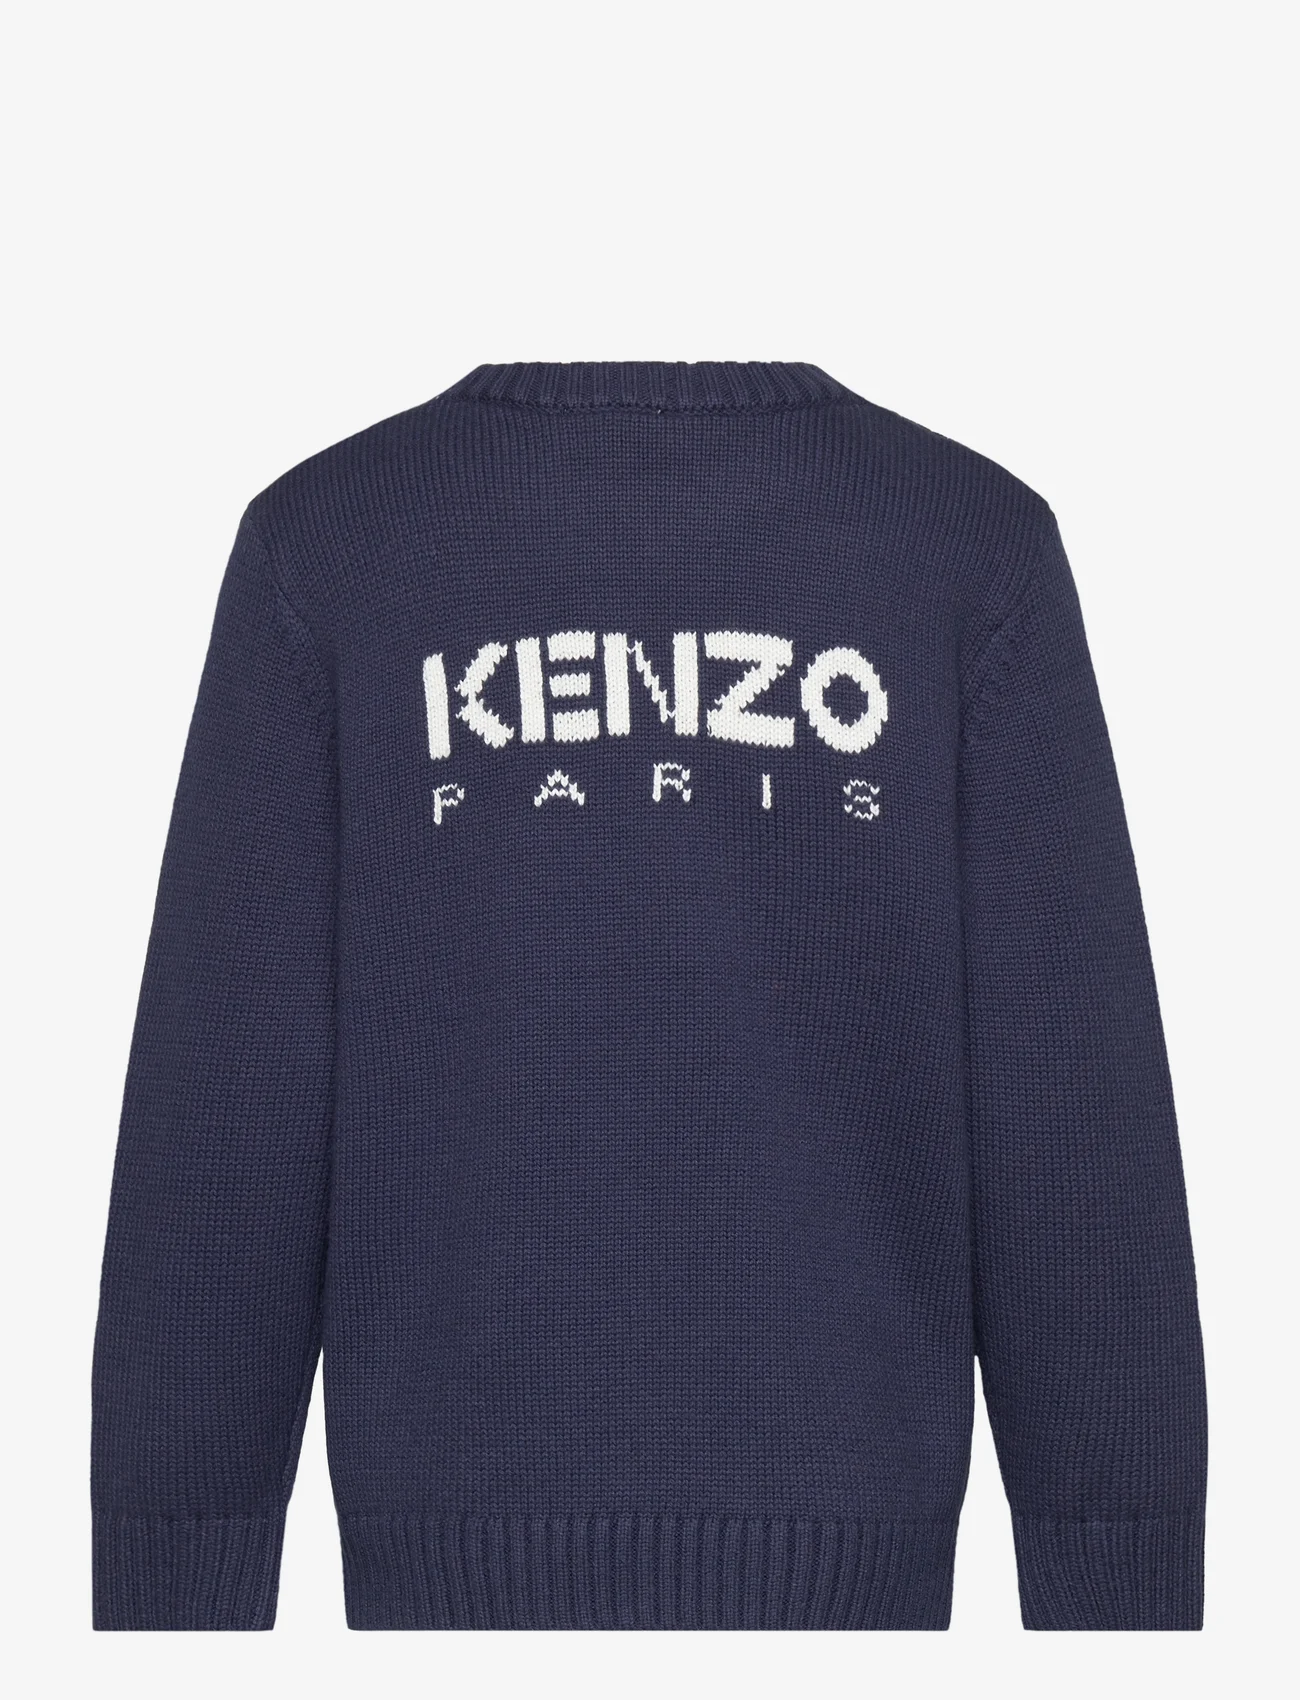 Kenzo - PULLOVER - swetry - navy - 1